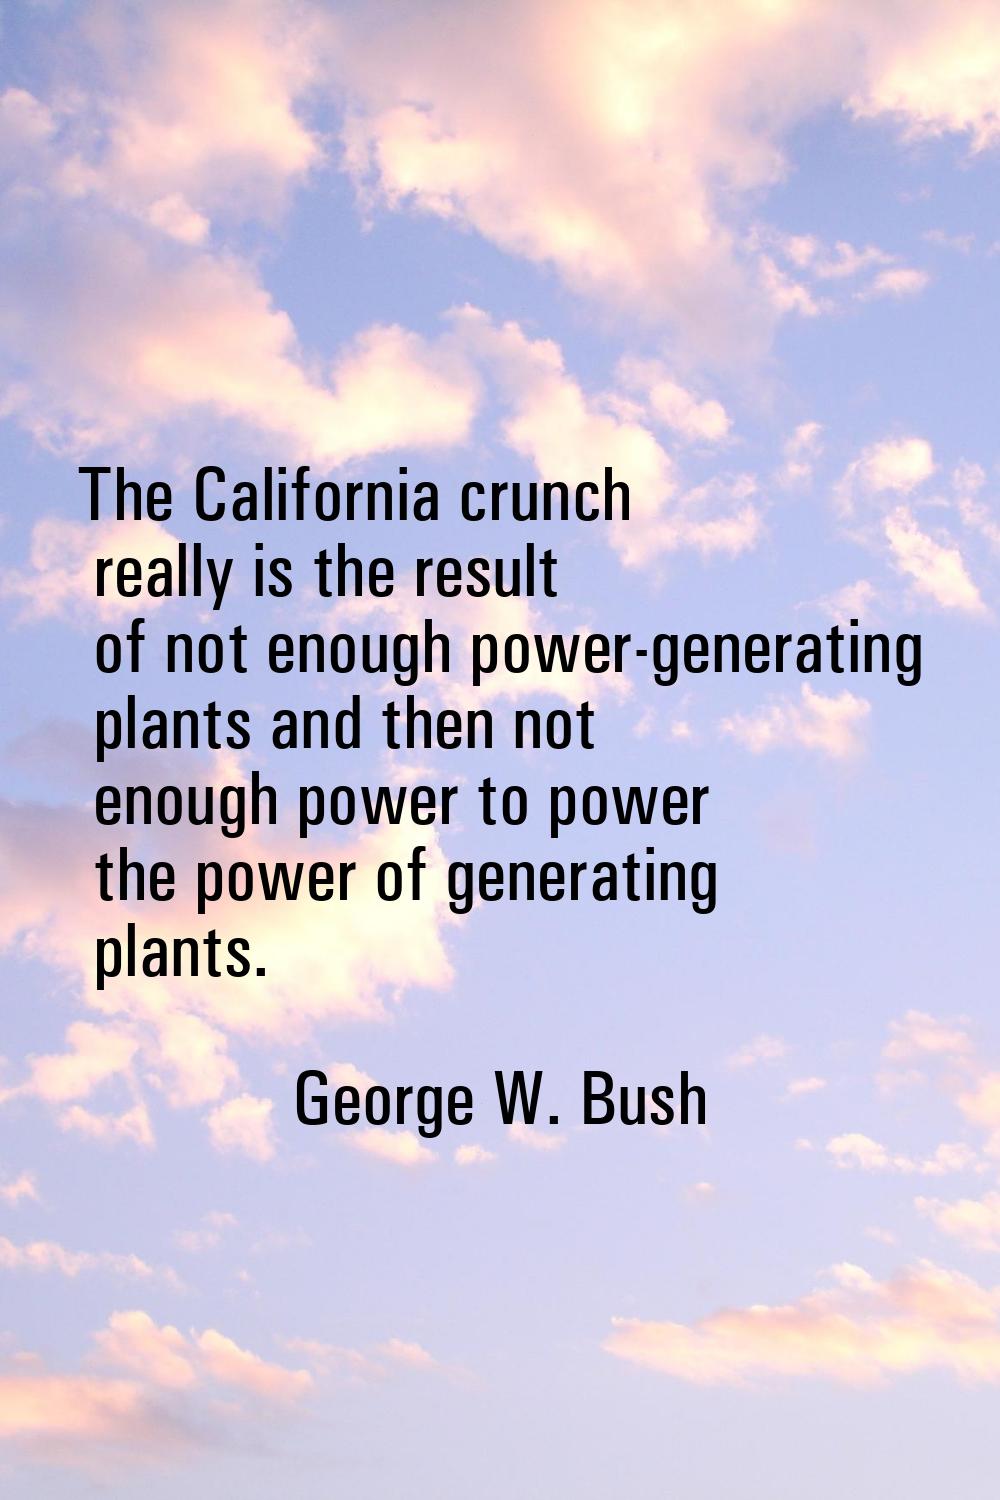 The California crunch really is the result of not enough power-generating plants and then not enoug